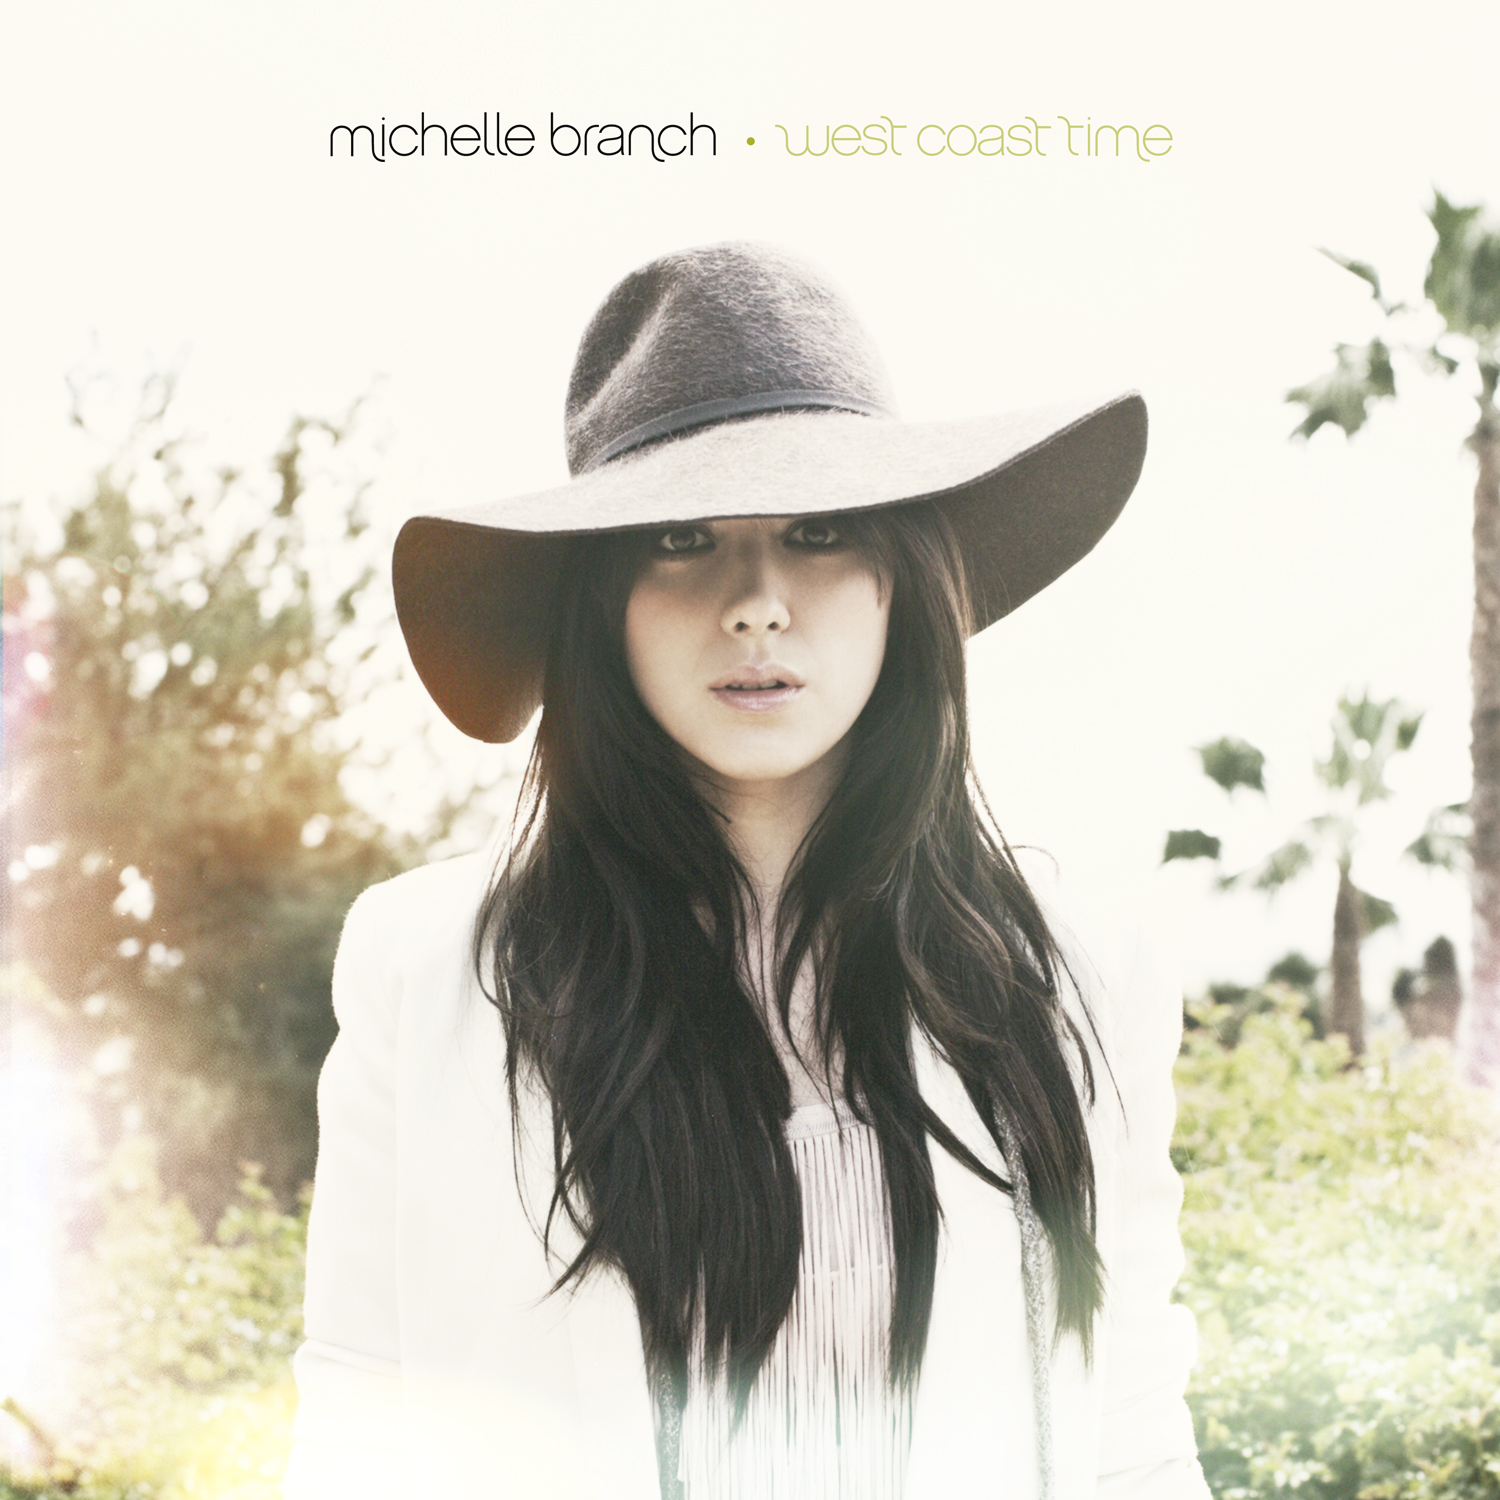 News Added May 24, 2012 Michelle Branch's Latest Solo album in years has been put on the back burner by her Label Warner Bros Records. The album has been finished and ready for print for a long time now. Michelle's Label had confirmed a release date October 2011. Recently Michelle tweeted to some angry fans […]